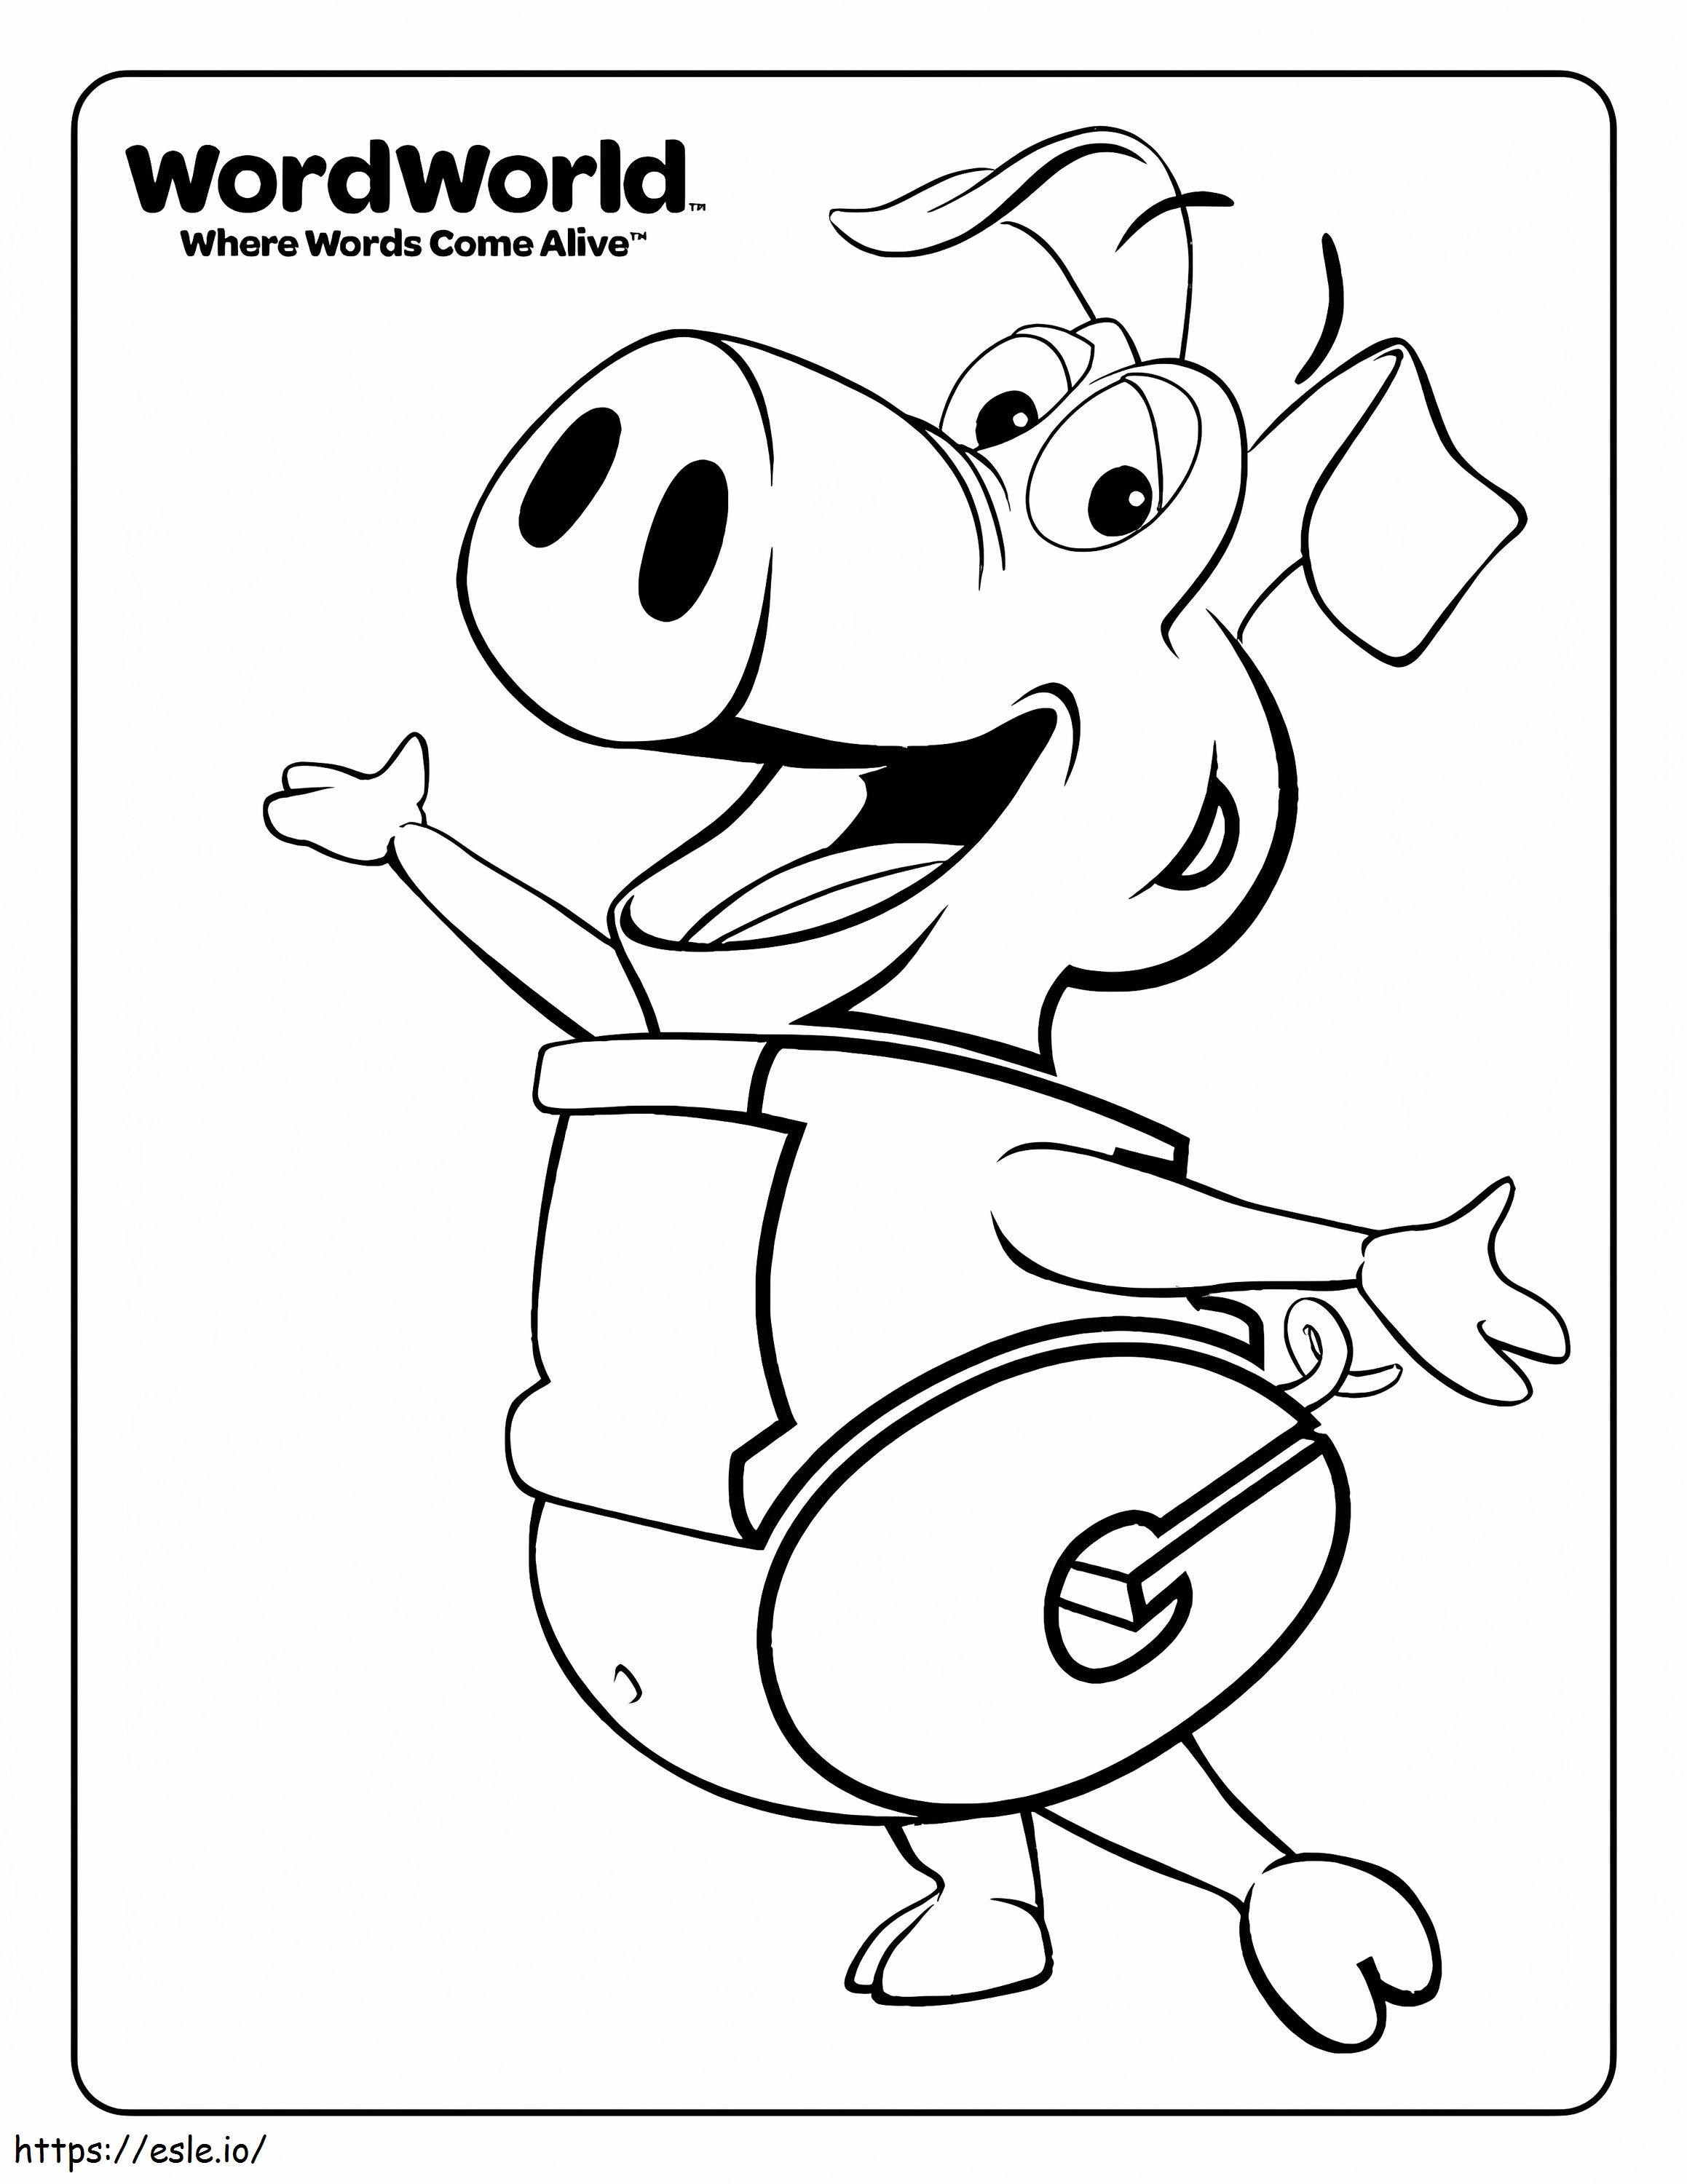 Pig WordWorld Coloring Page coloring page